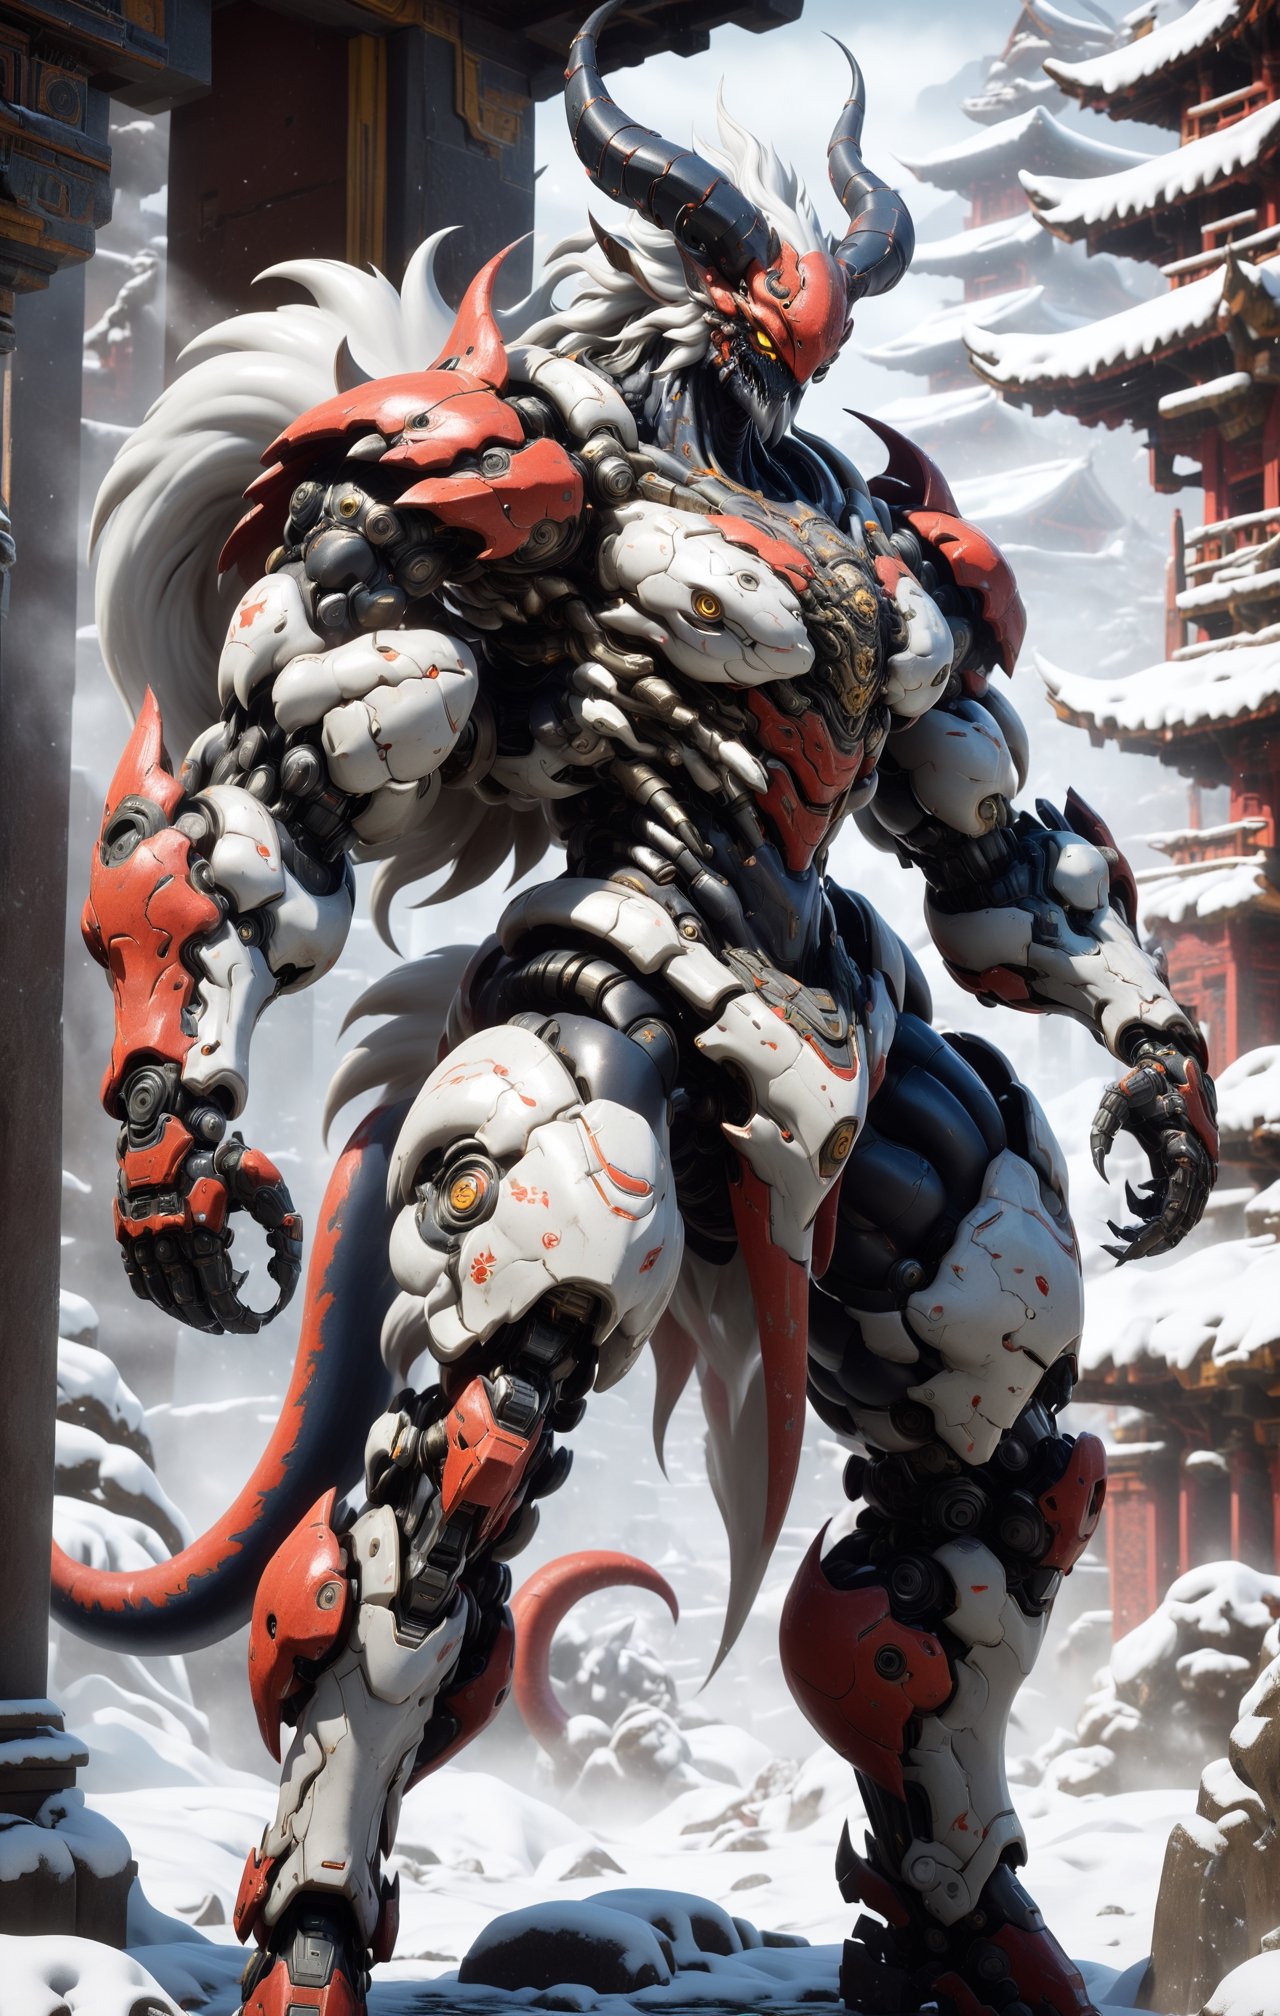 A terrifying ultimate beast centaur with kyubi with 9 tail half body, cyborg complex armor, in a fierce fighting pose amidst a snowy temple, enveloped in a misty snowstorm. Hyper Detailed, Cinematic Lighting Photography capturing every intricate detail, shot on nvidia rtx for realism, showcasing super-resolution and rendered in Unreal 5. Enhanced with subsurface scattering and PBR texturing for a lifelike appearance, in stunning 32k UHD resolution.